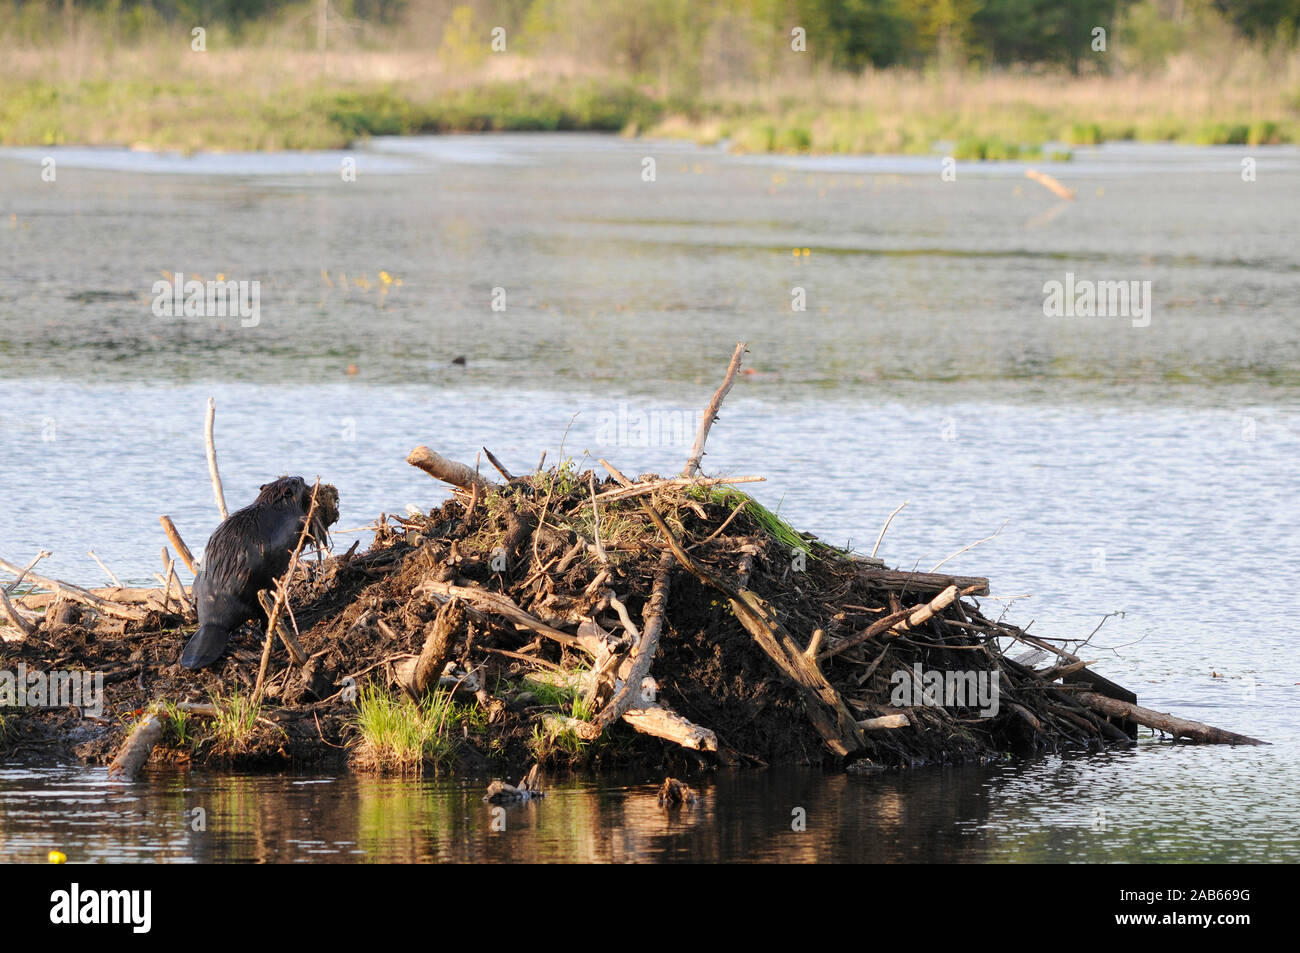 Beaver wild beaver building dam and den while exposing its body, head, eyes, ears, tail with a nice background  in its environment and surrounding. Stock Photo